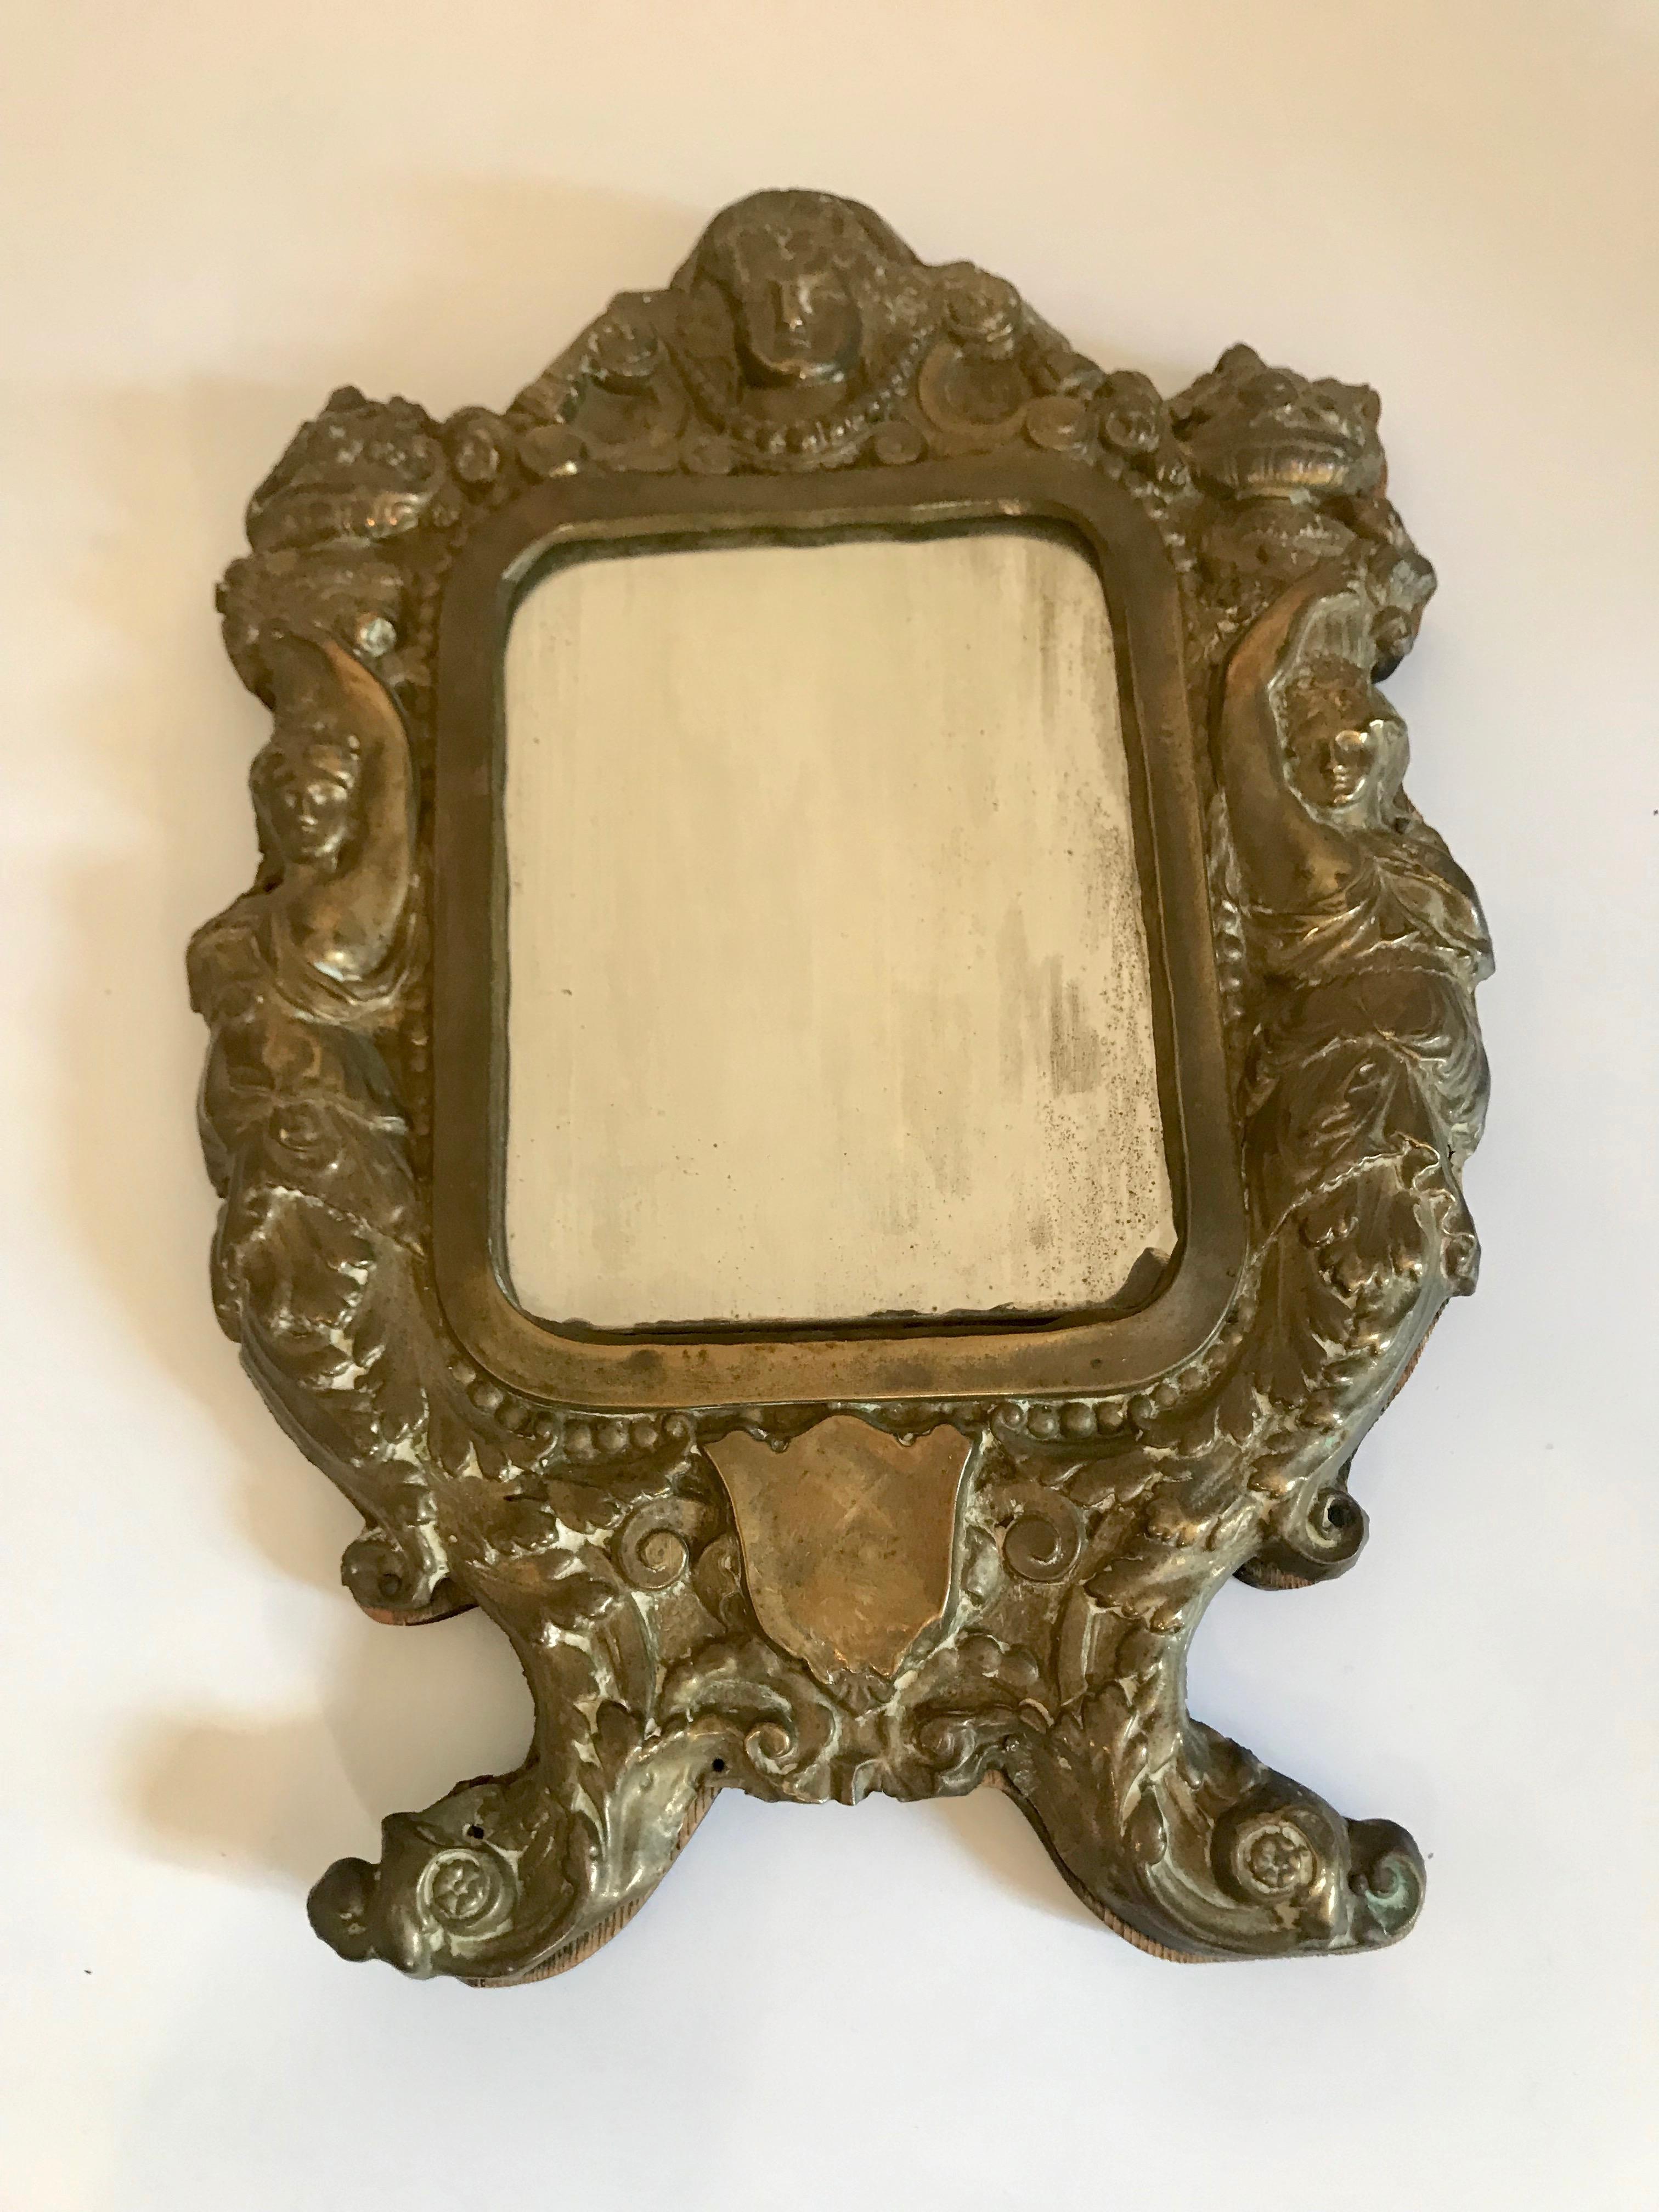 Pair of 19th century Italian mirrors in ornate brass frames. Fits mirror size 4.75 in by 6.25 in. The brass frame design shows a woman and a column on either side, a woman's face on the top, and a shield on the bottom.